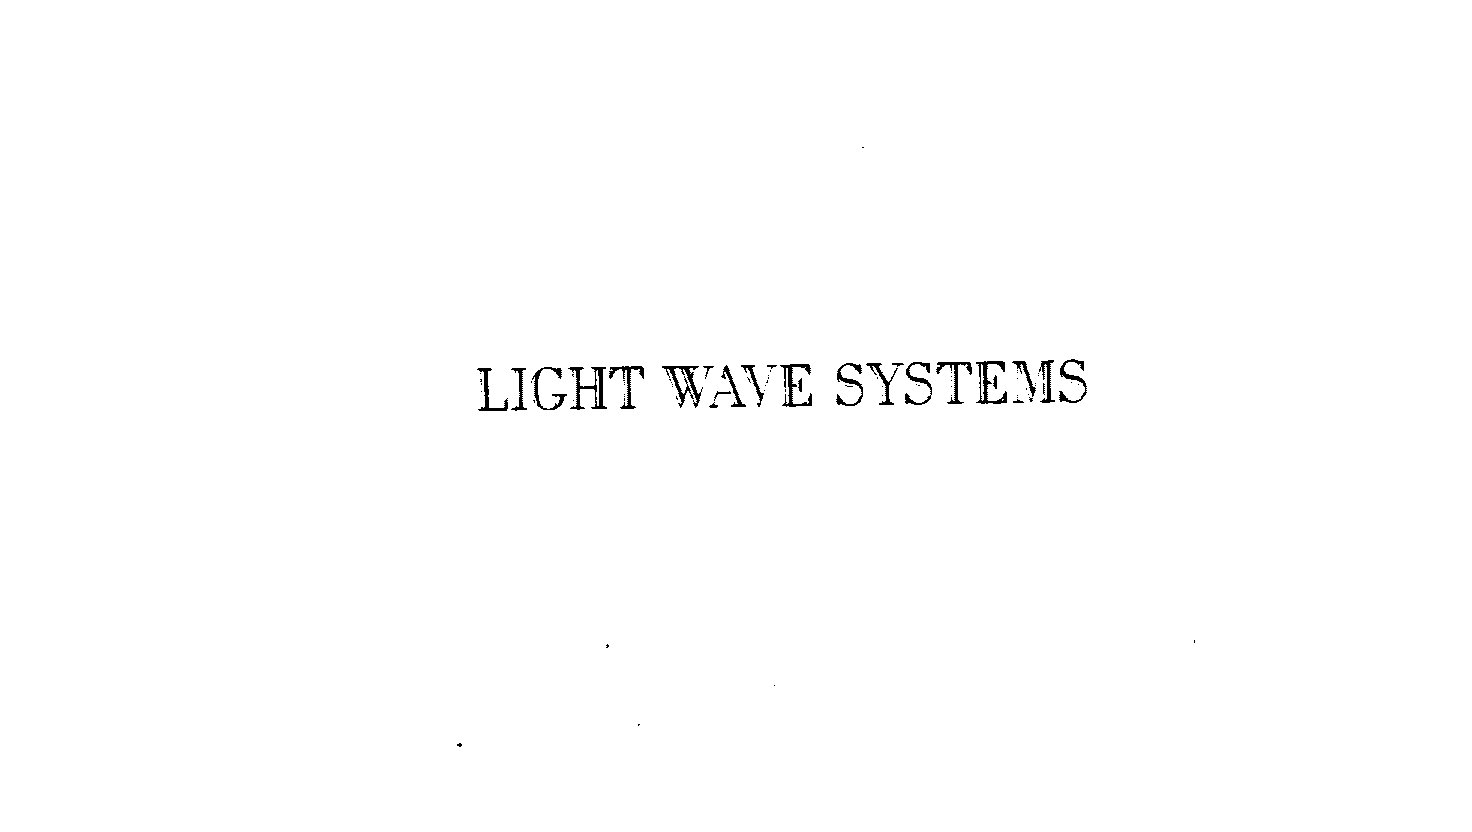  LIGHT WAVE SYSTEMS